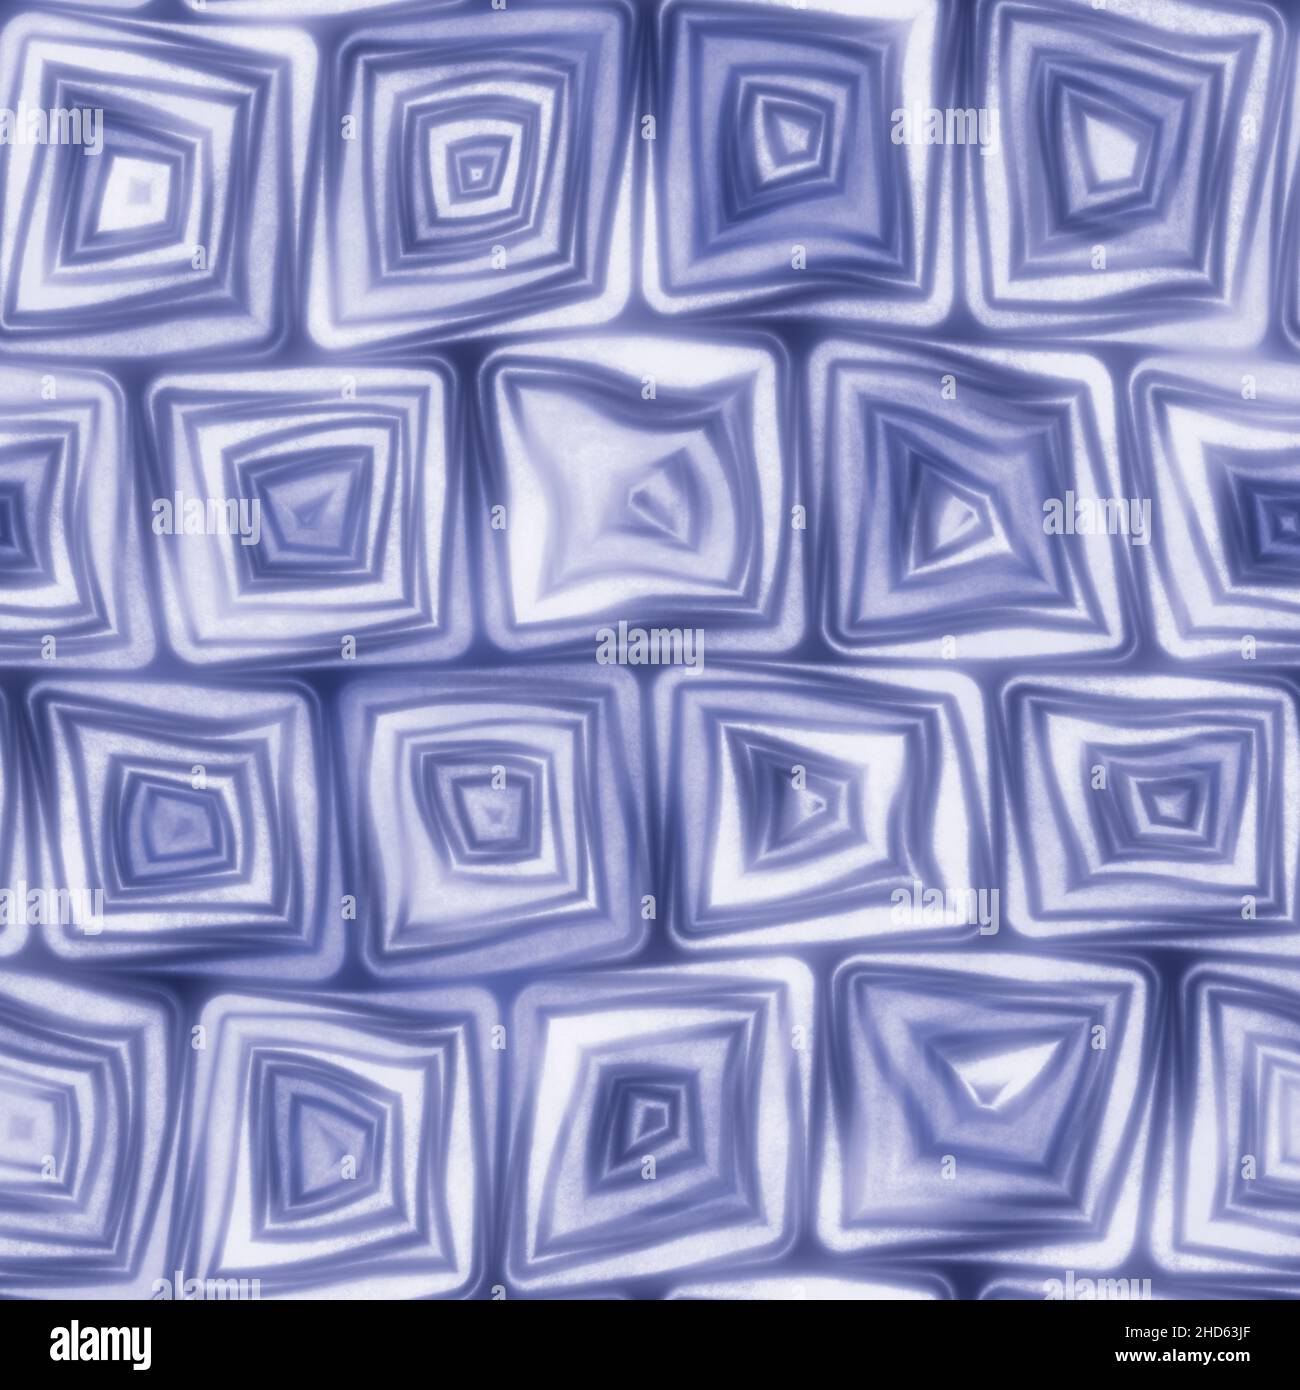 Large Blue Squiggly Swirly Spiral Squares Seamless Texture Pattern Stock Photo